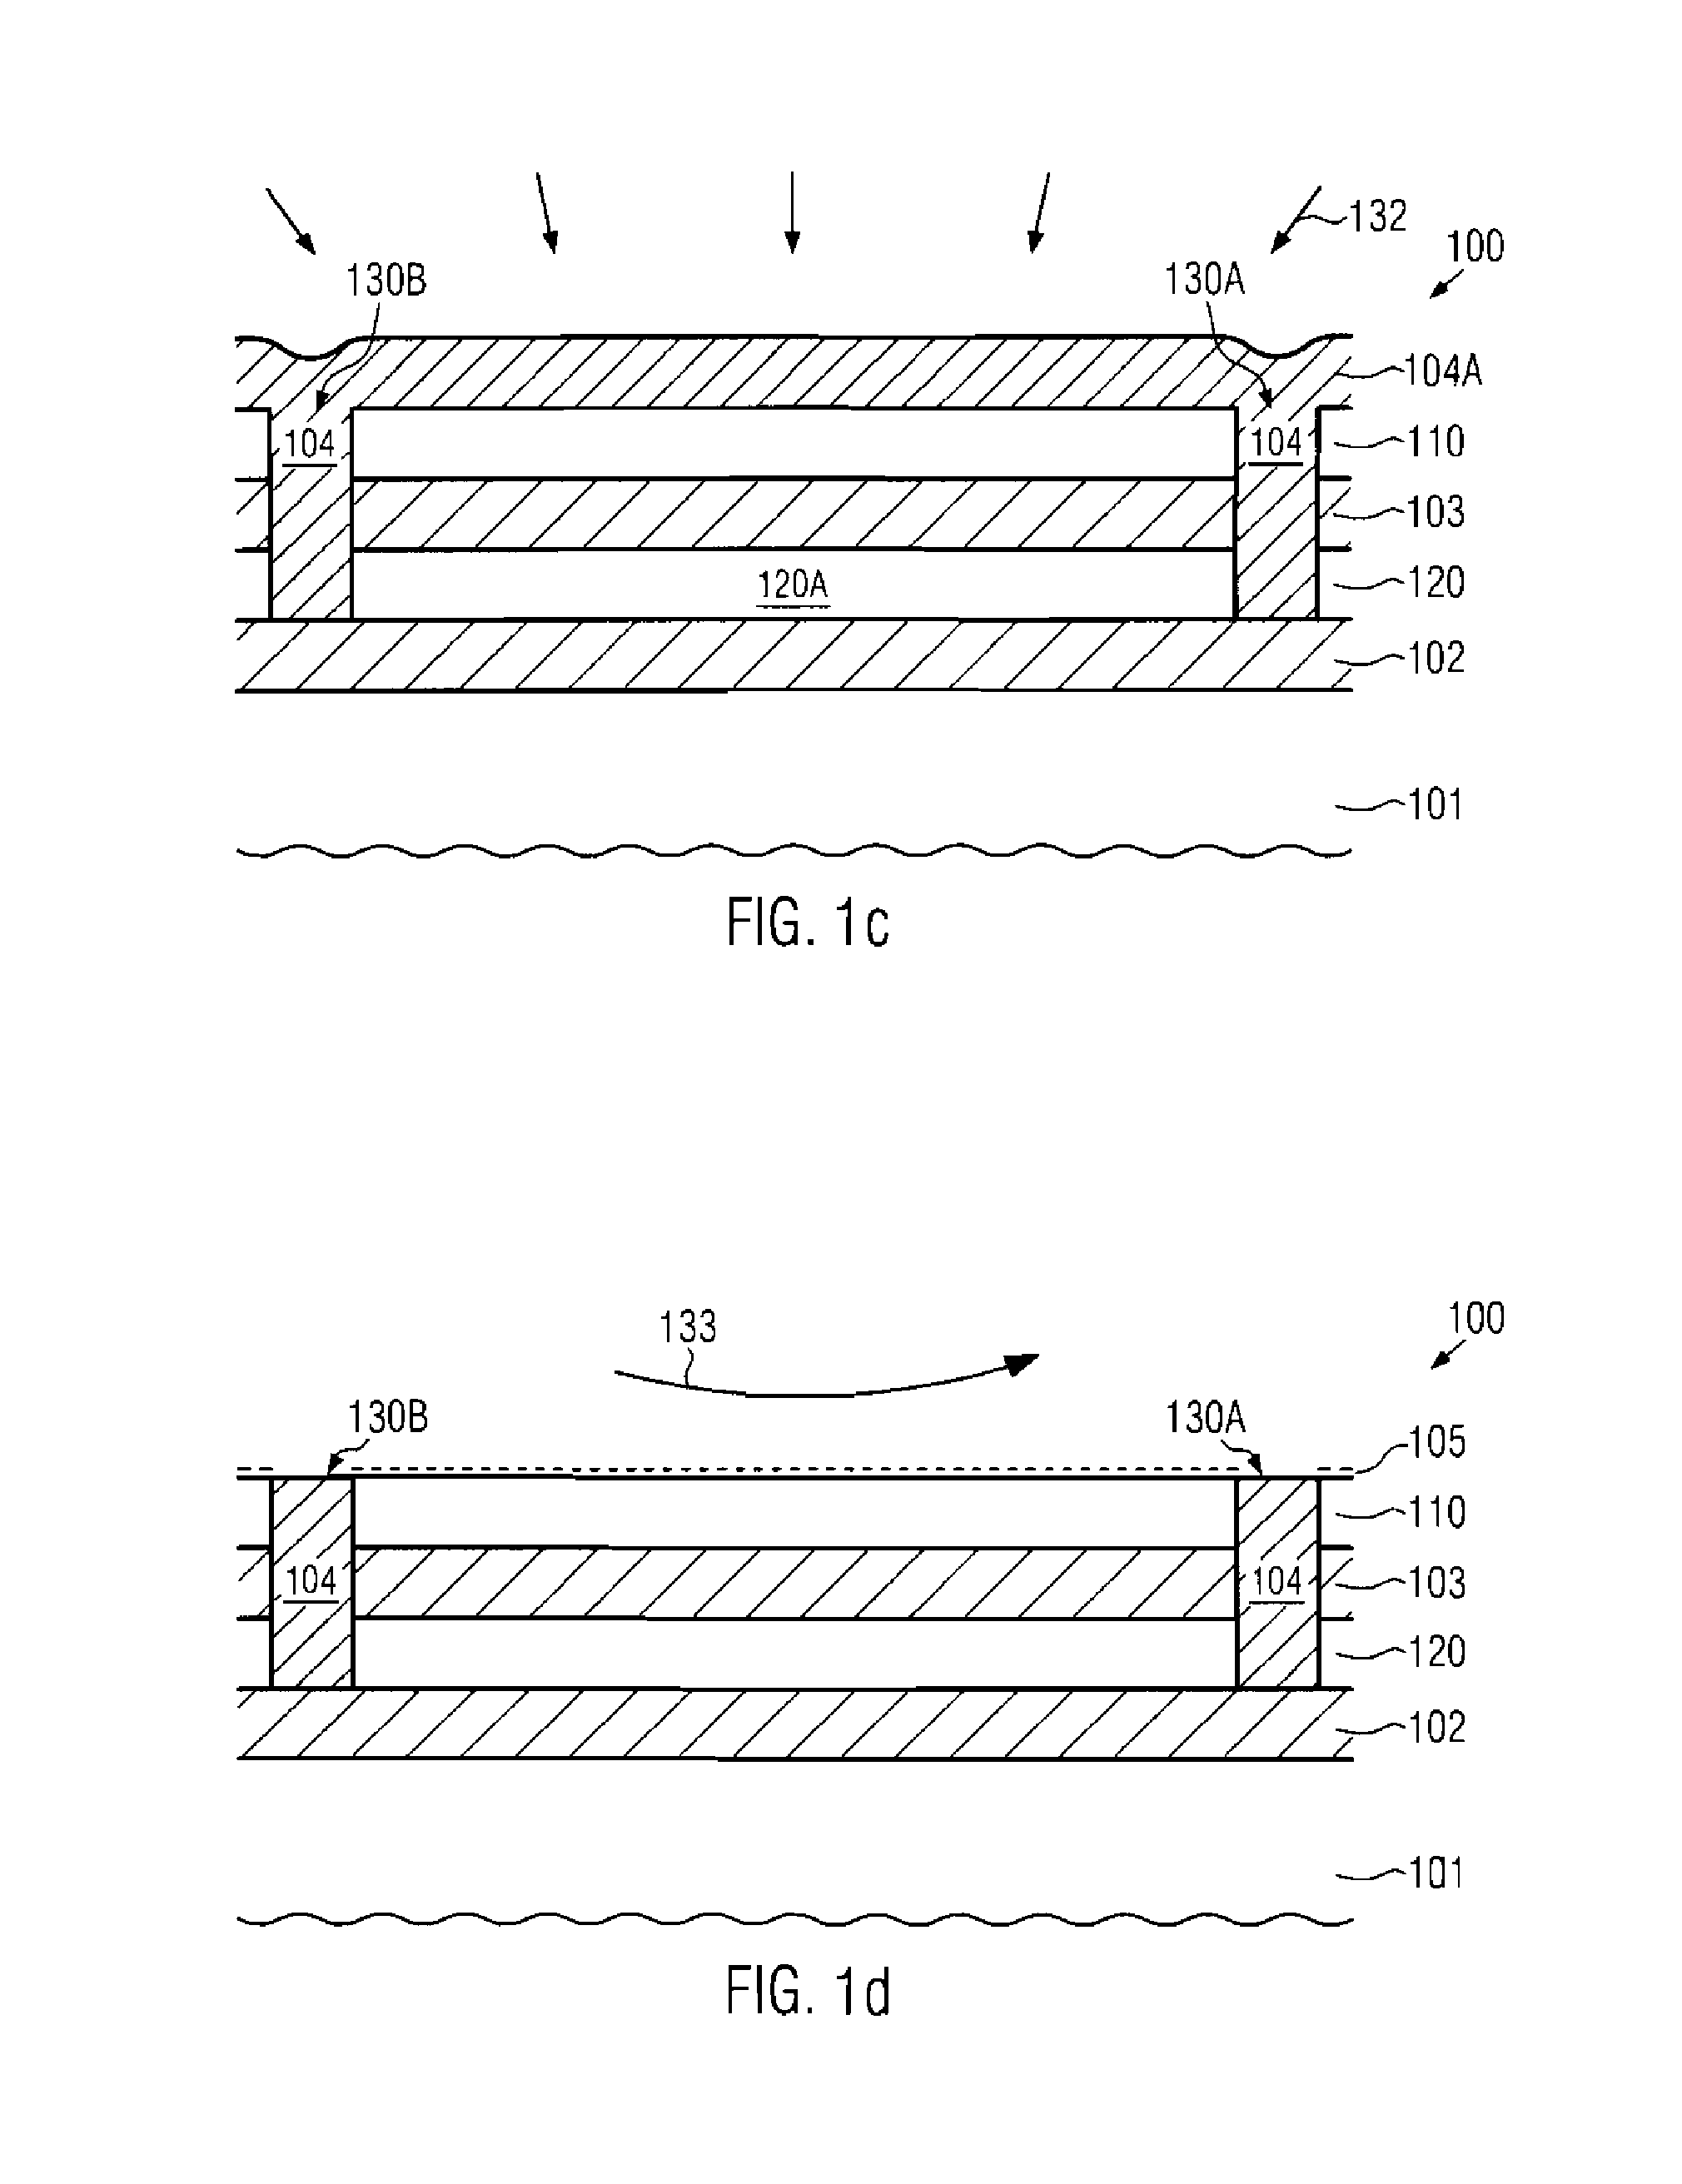 Optical signal transfer in a semiconductor device by using monolithic opto-electronic components